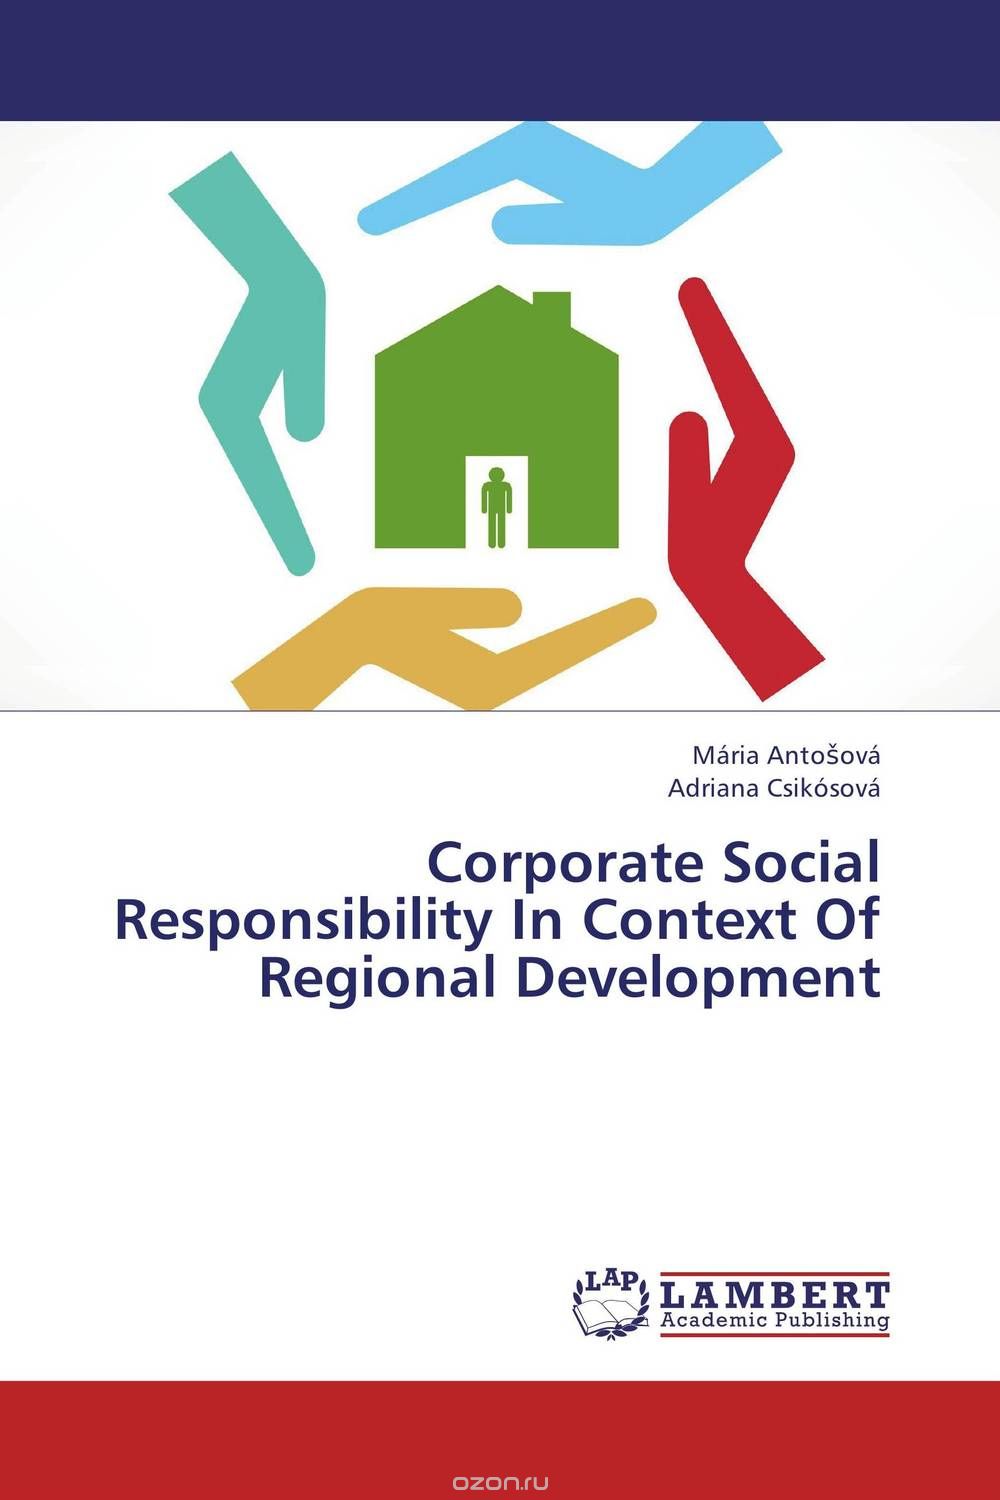 Corporate Social Responsibility In Context Of Regional Development